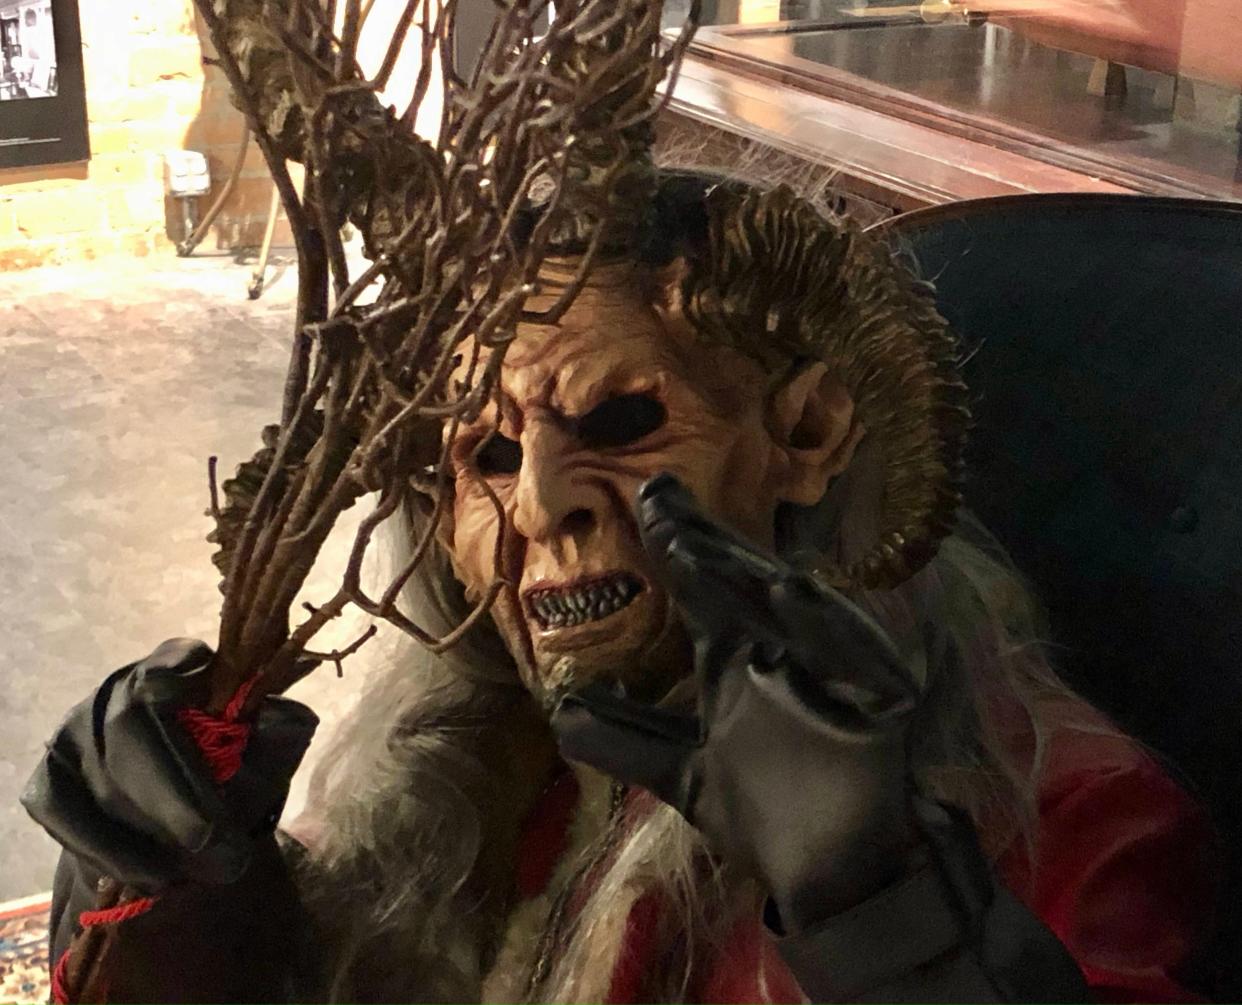 Krampus, a horned, anthropomorphic figure in Alpine folklore who scares misbehaving children during the Christmas season, will visit The Mariner theater in Marine City Dec. 3.